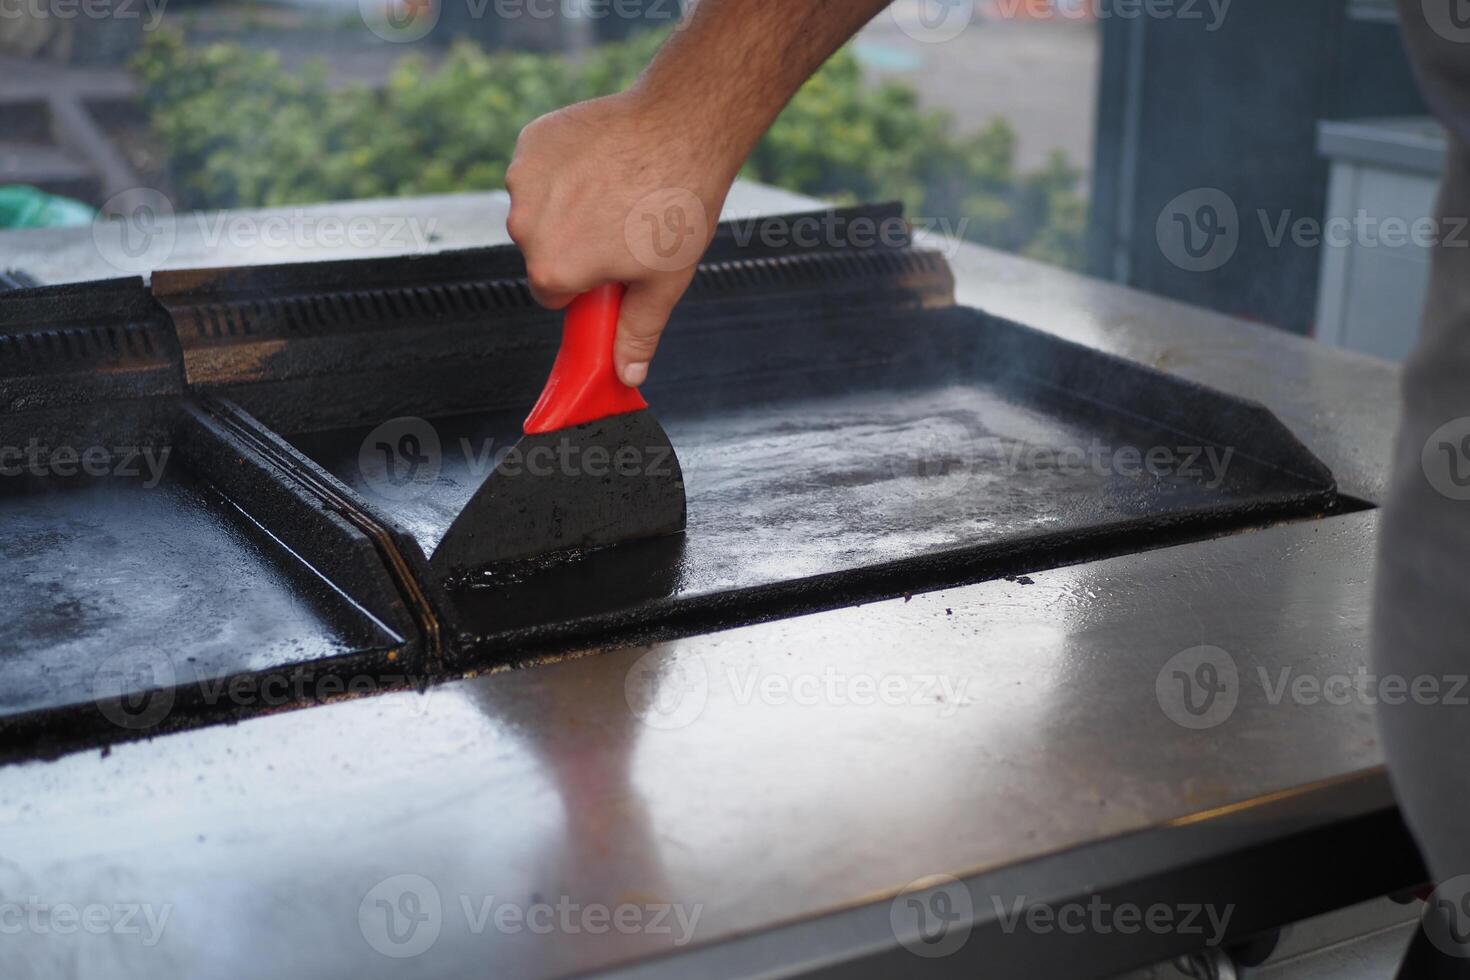 Cleaning the grill with scrubber, photo